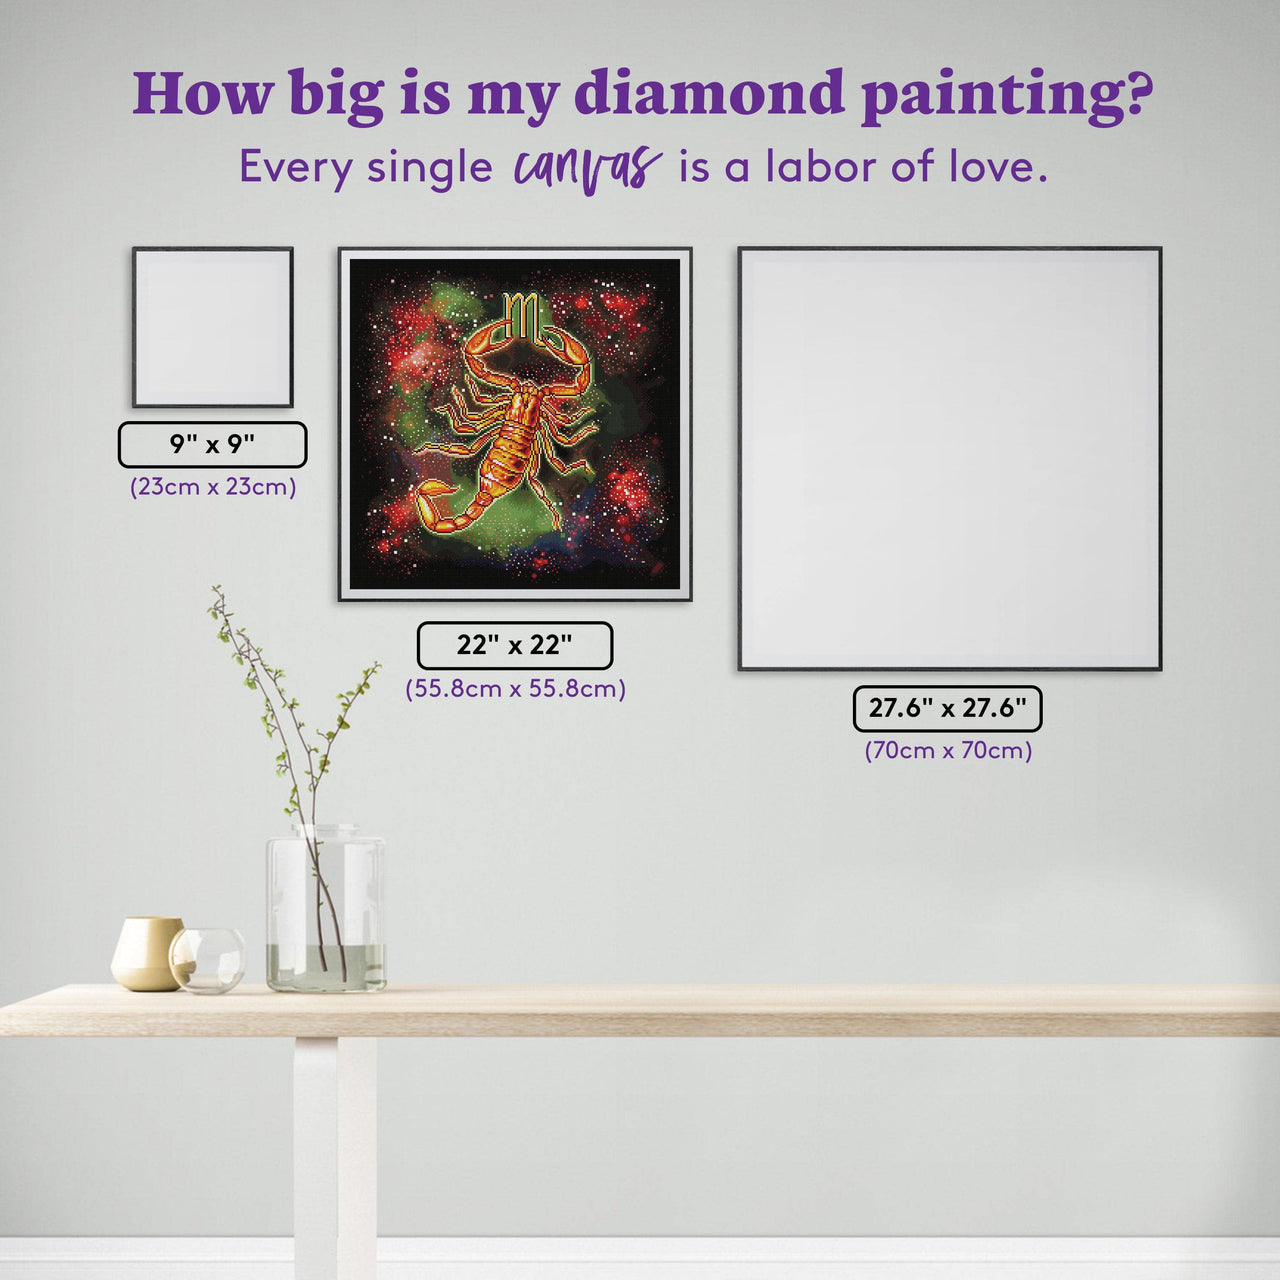 Diamond Painting Scorpio 22" x 22" (55.8cm x 55.8cm) / Square with 54 Colors including 2 ABs and 1 Special Diamonds / 49,916